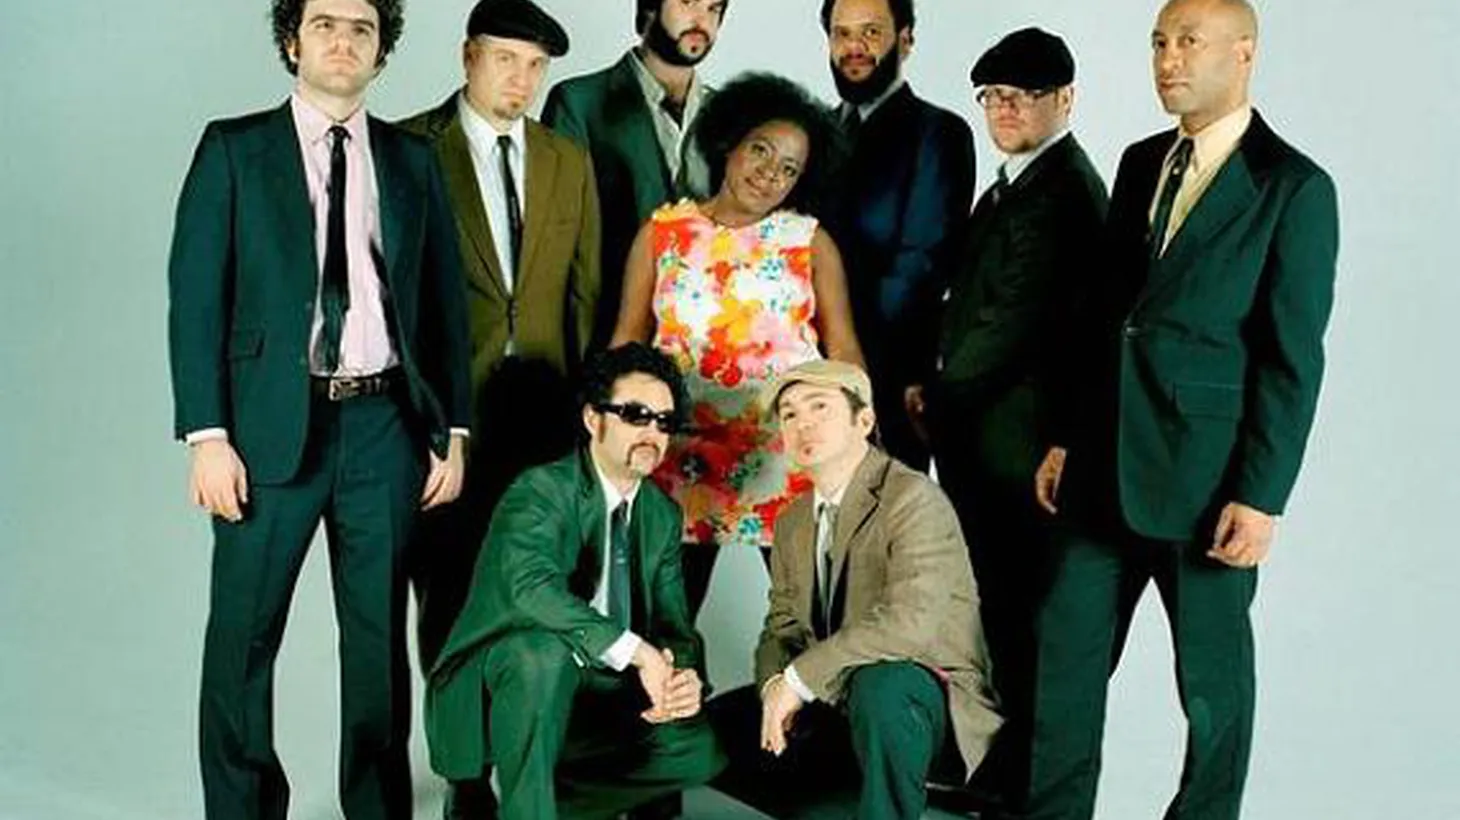 Sharon Jones & The Dap Kings recall the golden days of Muscle Shoals and Stax records with raw power and rhythmic swagger. They’ll perform songs from their original R&B arsenal and treat listeners to an action packed set on Morning Becomes Eclectic at 11:15am.